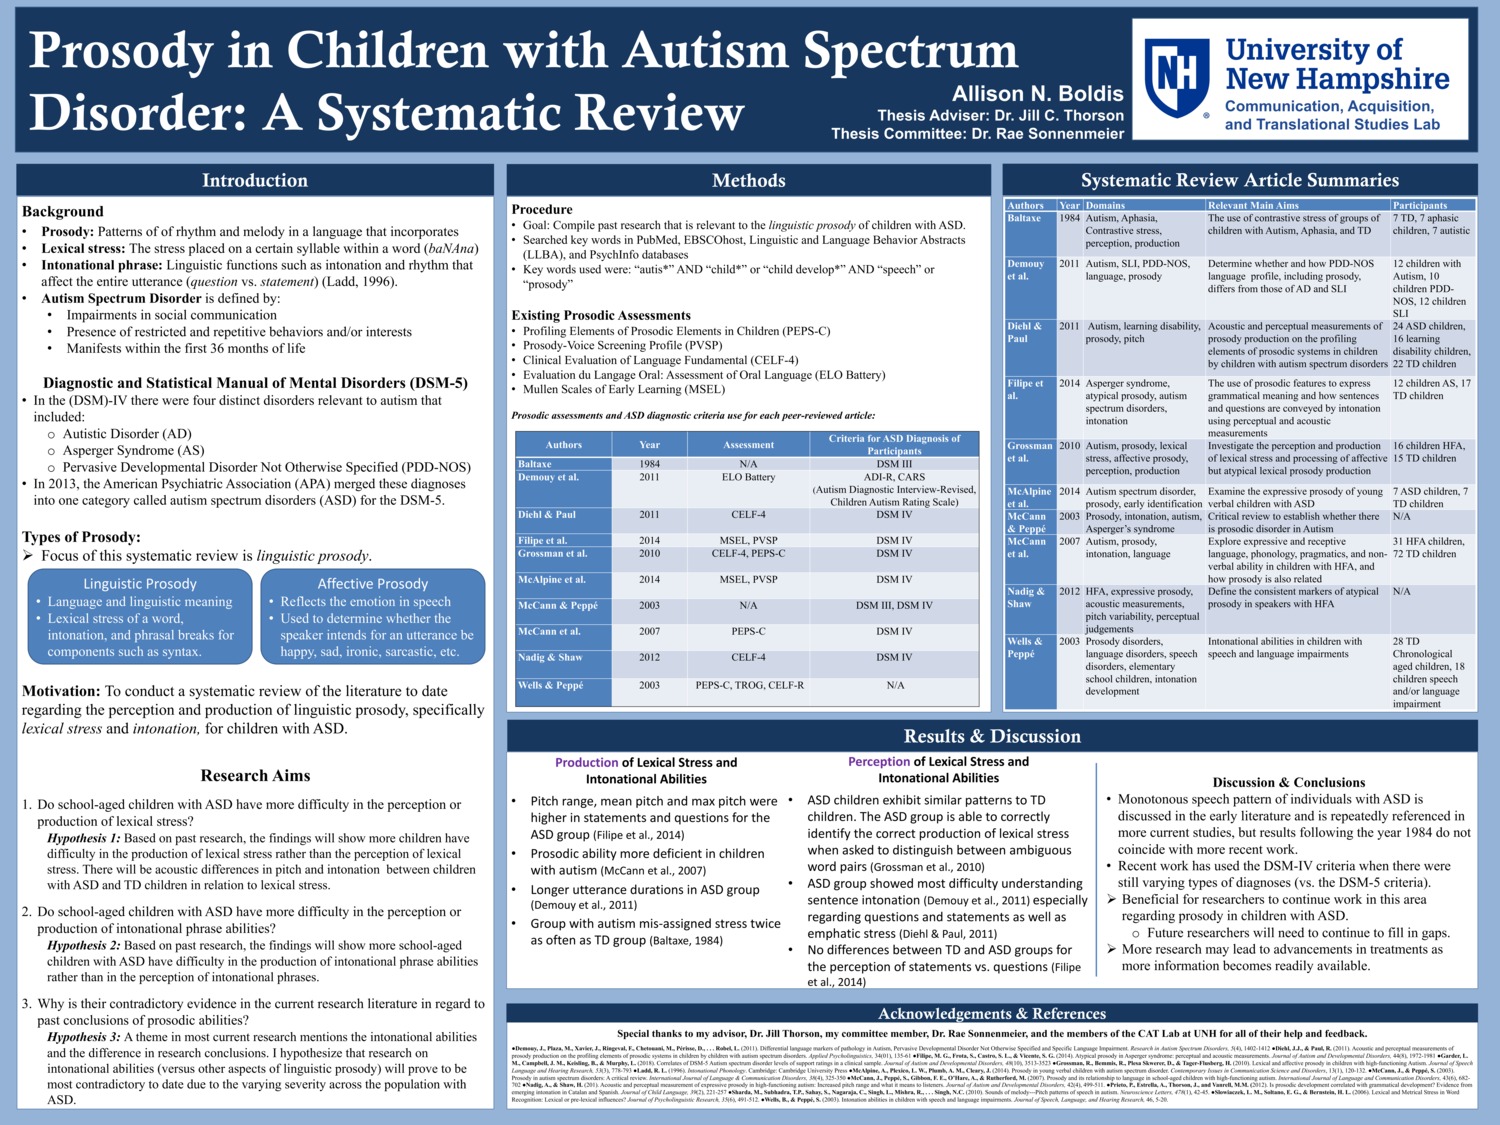  Prosody In Children With Autism Spectrum Disorder: A Systematic Review by anb1015